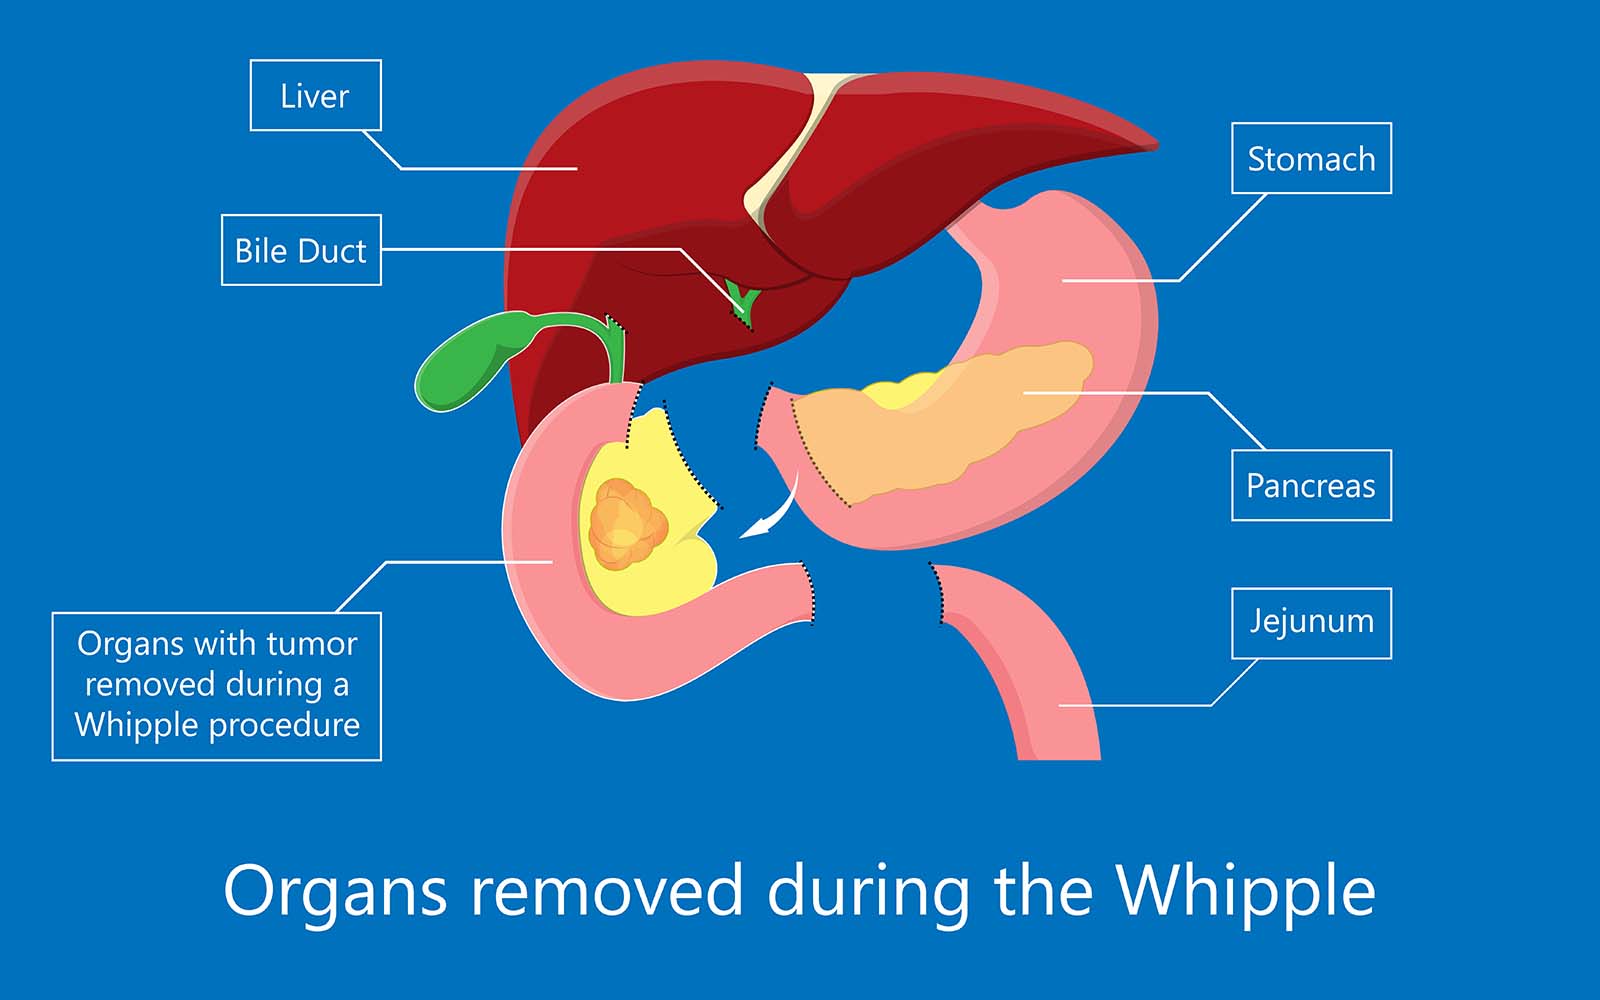 Illustration of the organs removed during the Whipple surgery procedure